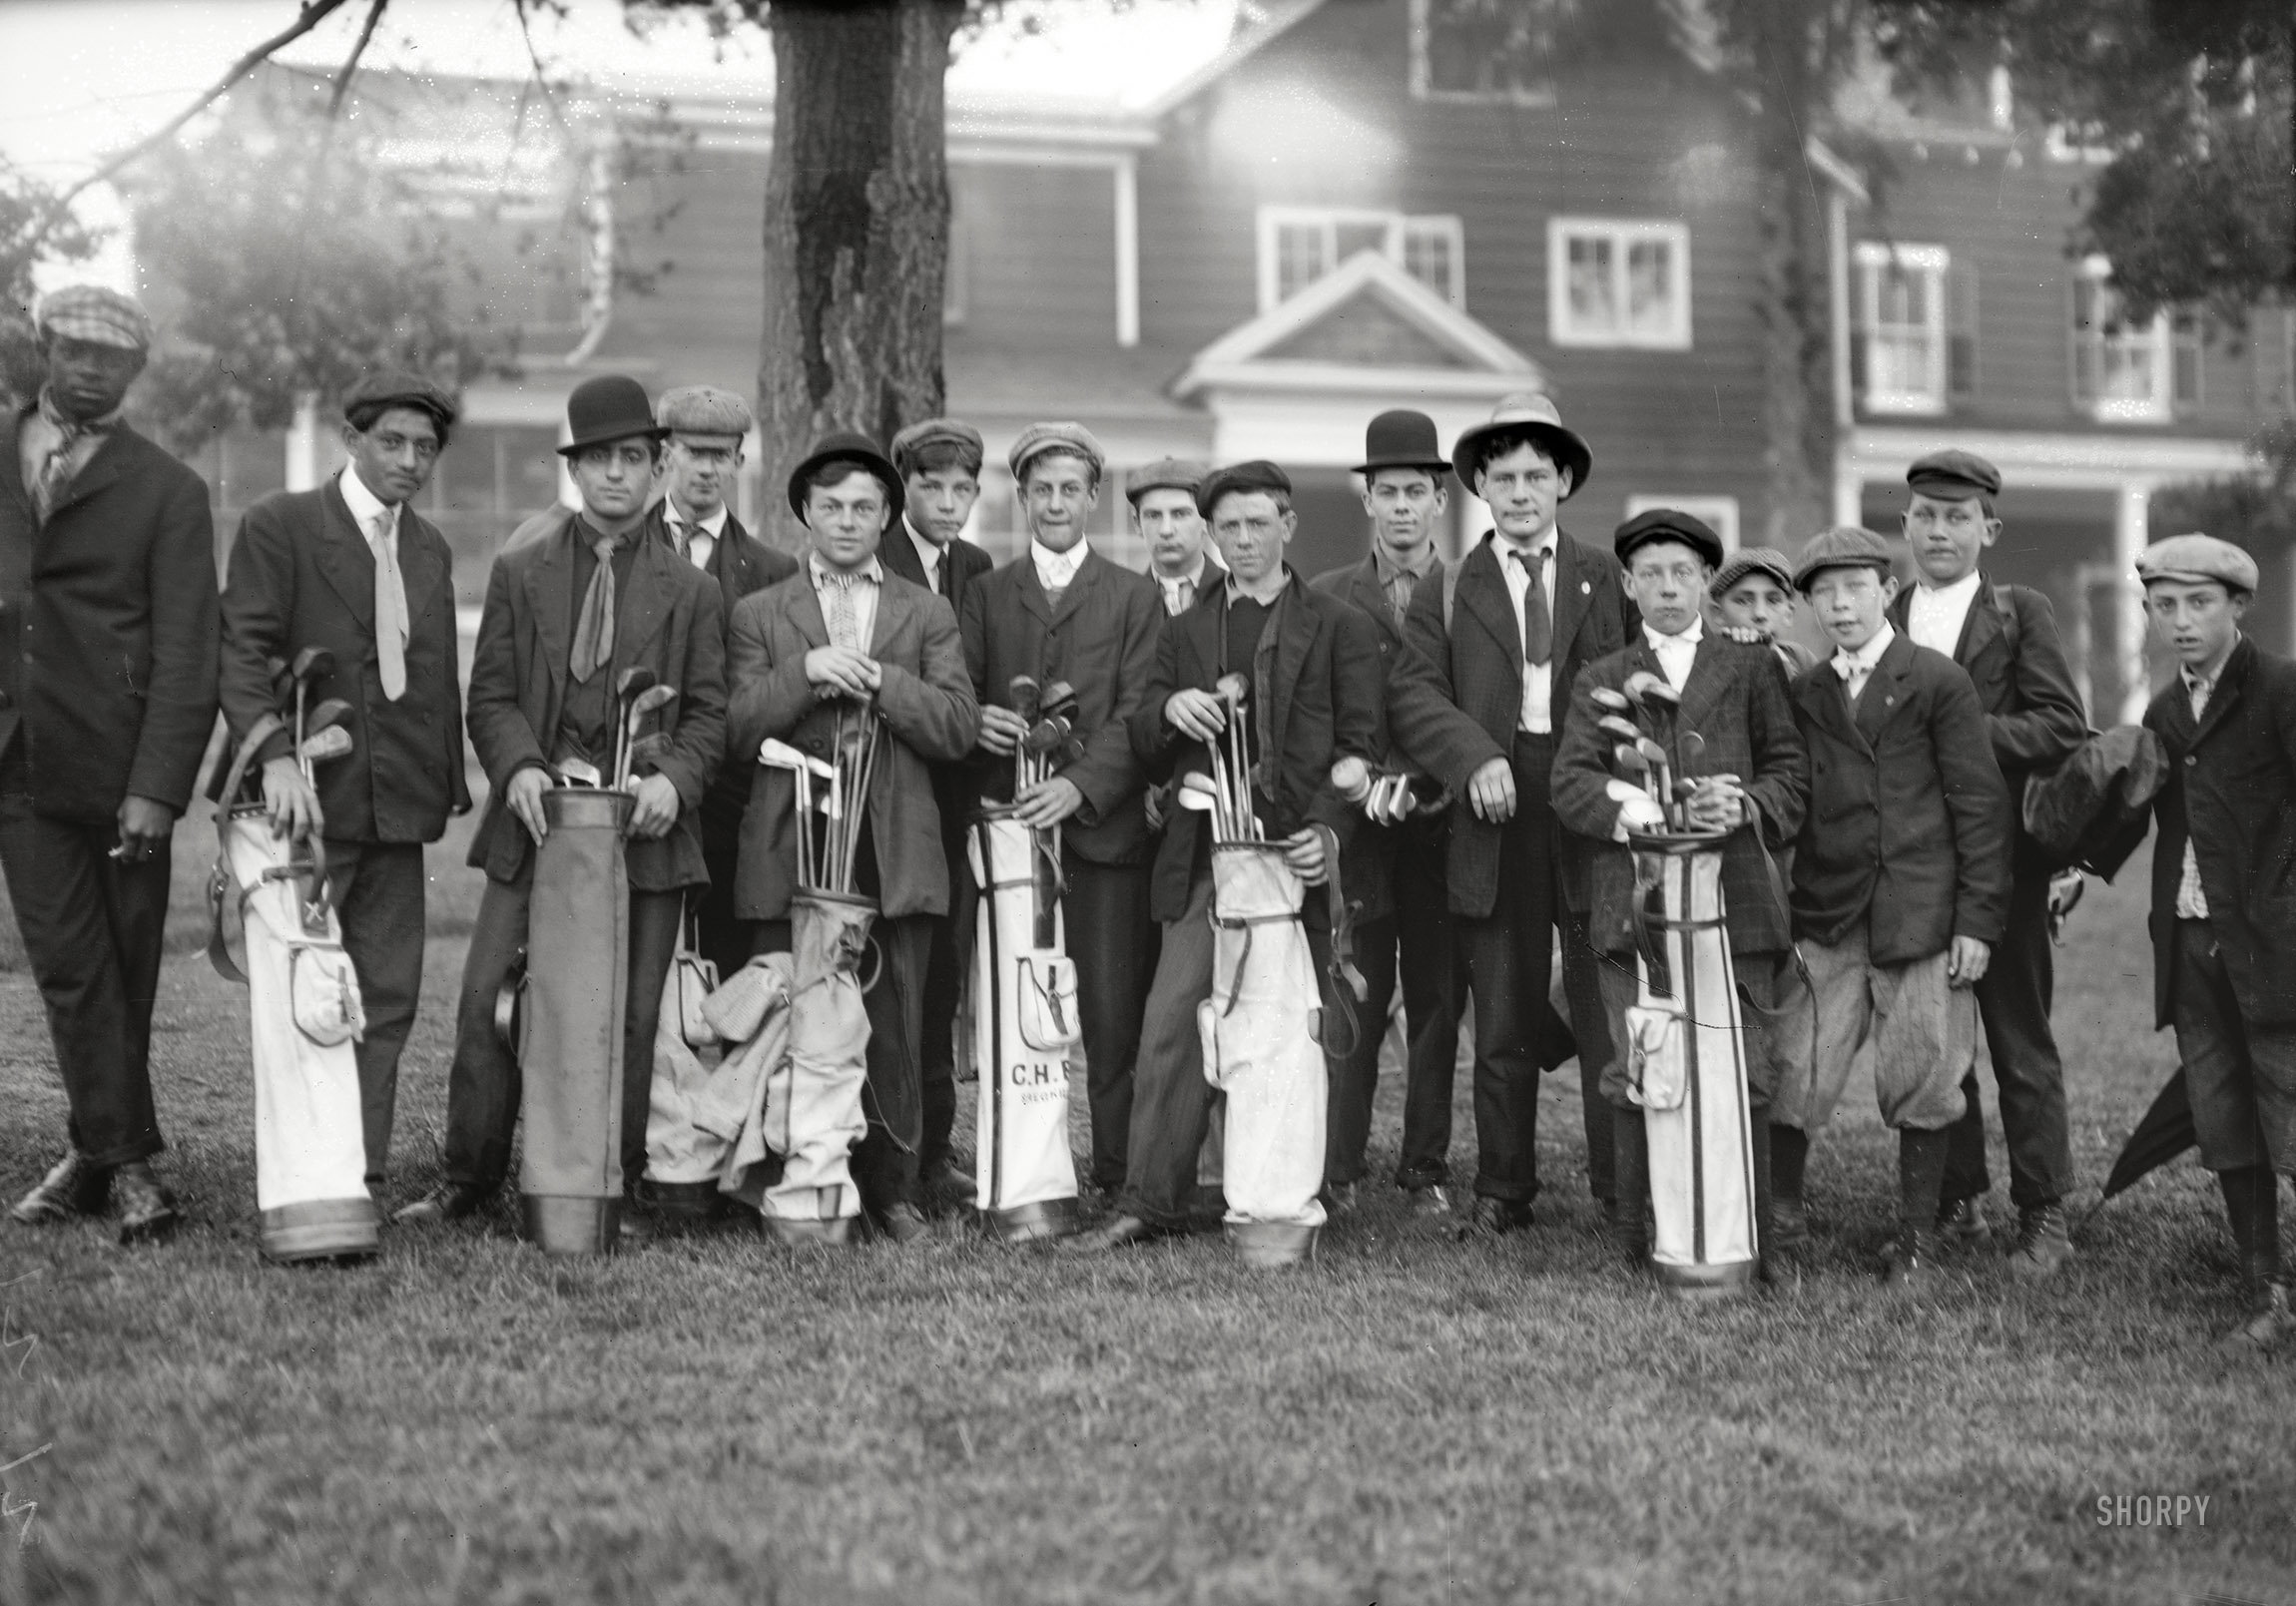 May 1908. Union County, New Jersey. "Golf caddies at Baltusrol." 5x7 glass negative, George Grantham Bain Collection. View full size.